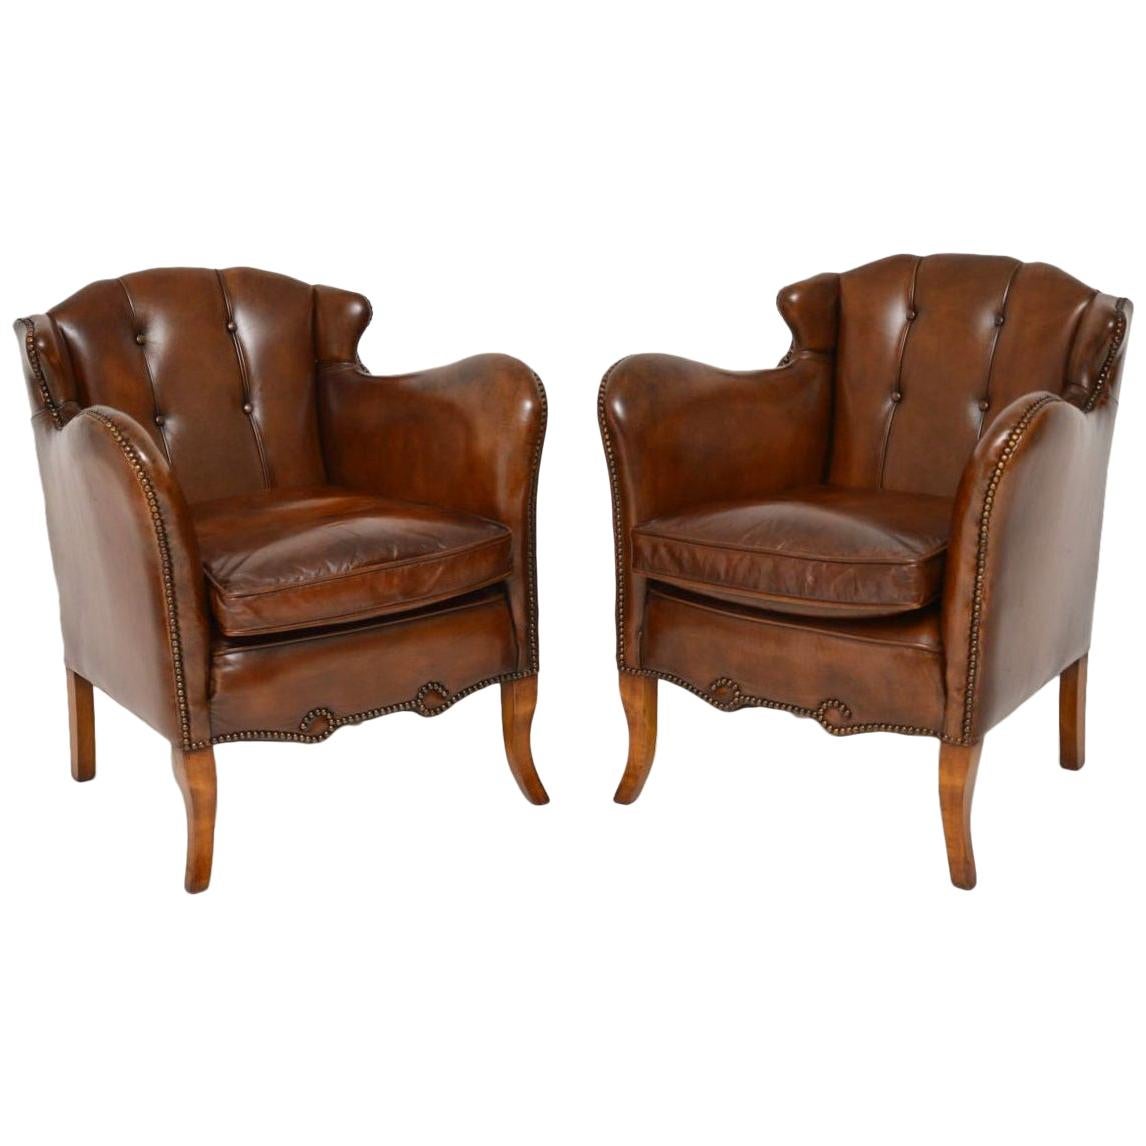 Pair of Stylish Antique Swedish Leather Armchairs